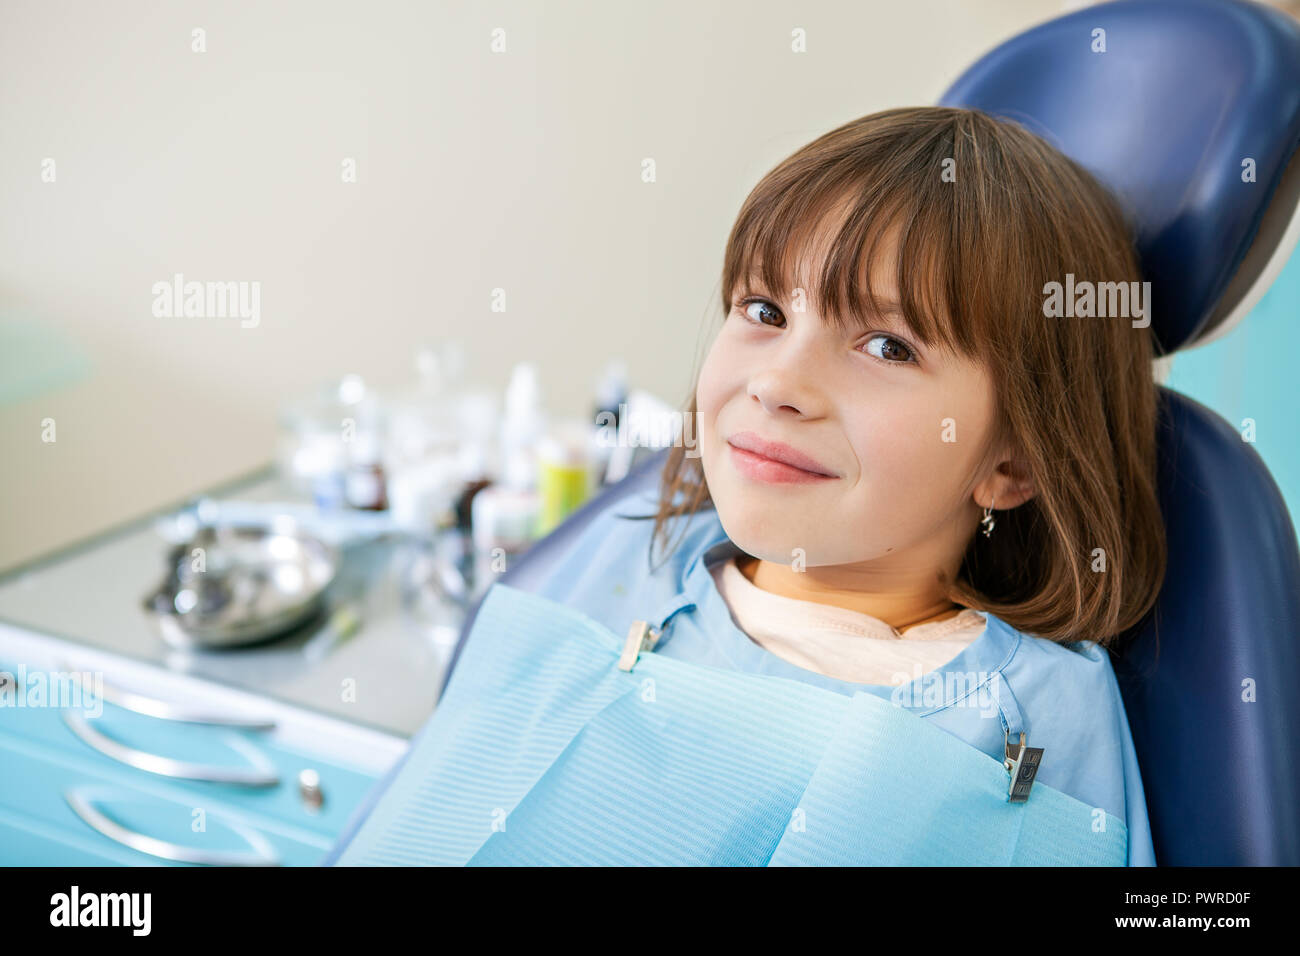 Patient girl is waiting for an examination on the dental chair Stock Photo